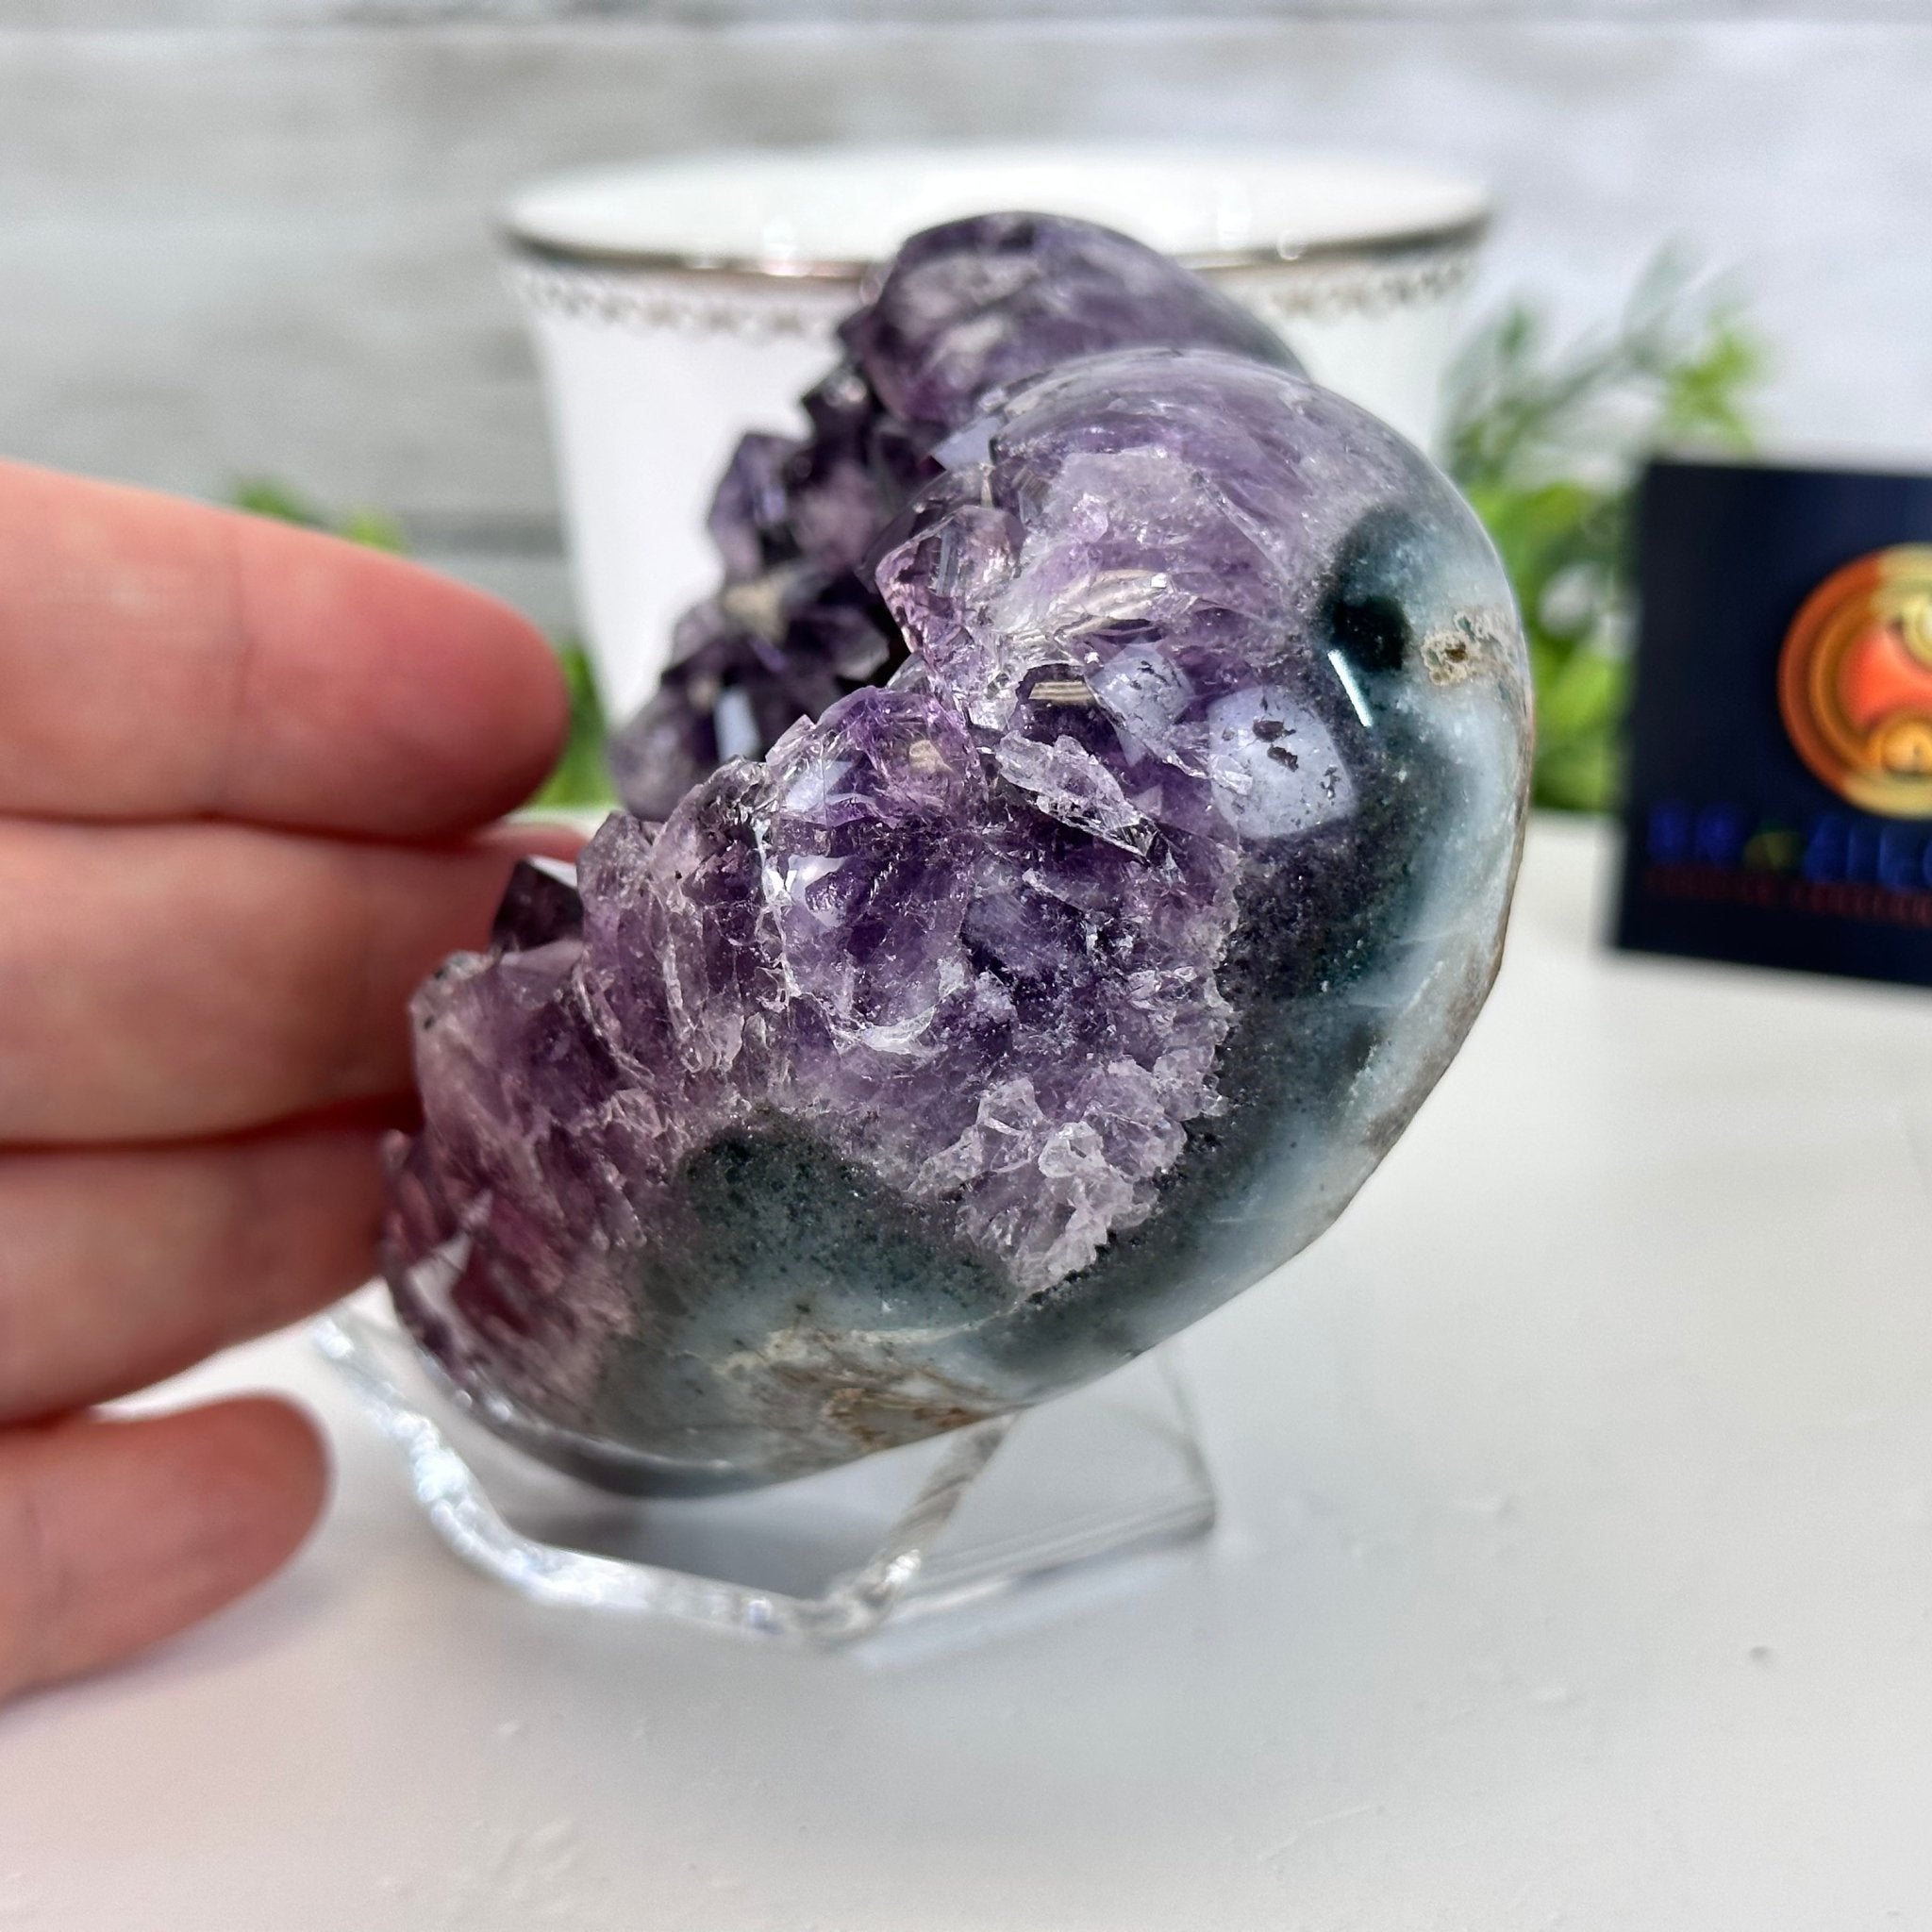 Extra Plus Quality Amethyst Heart Geode on an Acrylic Stand, 1.22 lbs & 3.2" Tall #5462-0058 by Brazil Gems - Brazil GemsBrazil GemsExtra Plus Quality Amethyst Heart Geode on an Acrylic Stand, 1.22 lbs & 3.2" Tall #5462-0058 by Brazil GemsHearts5462-0058